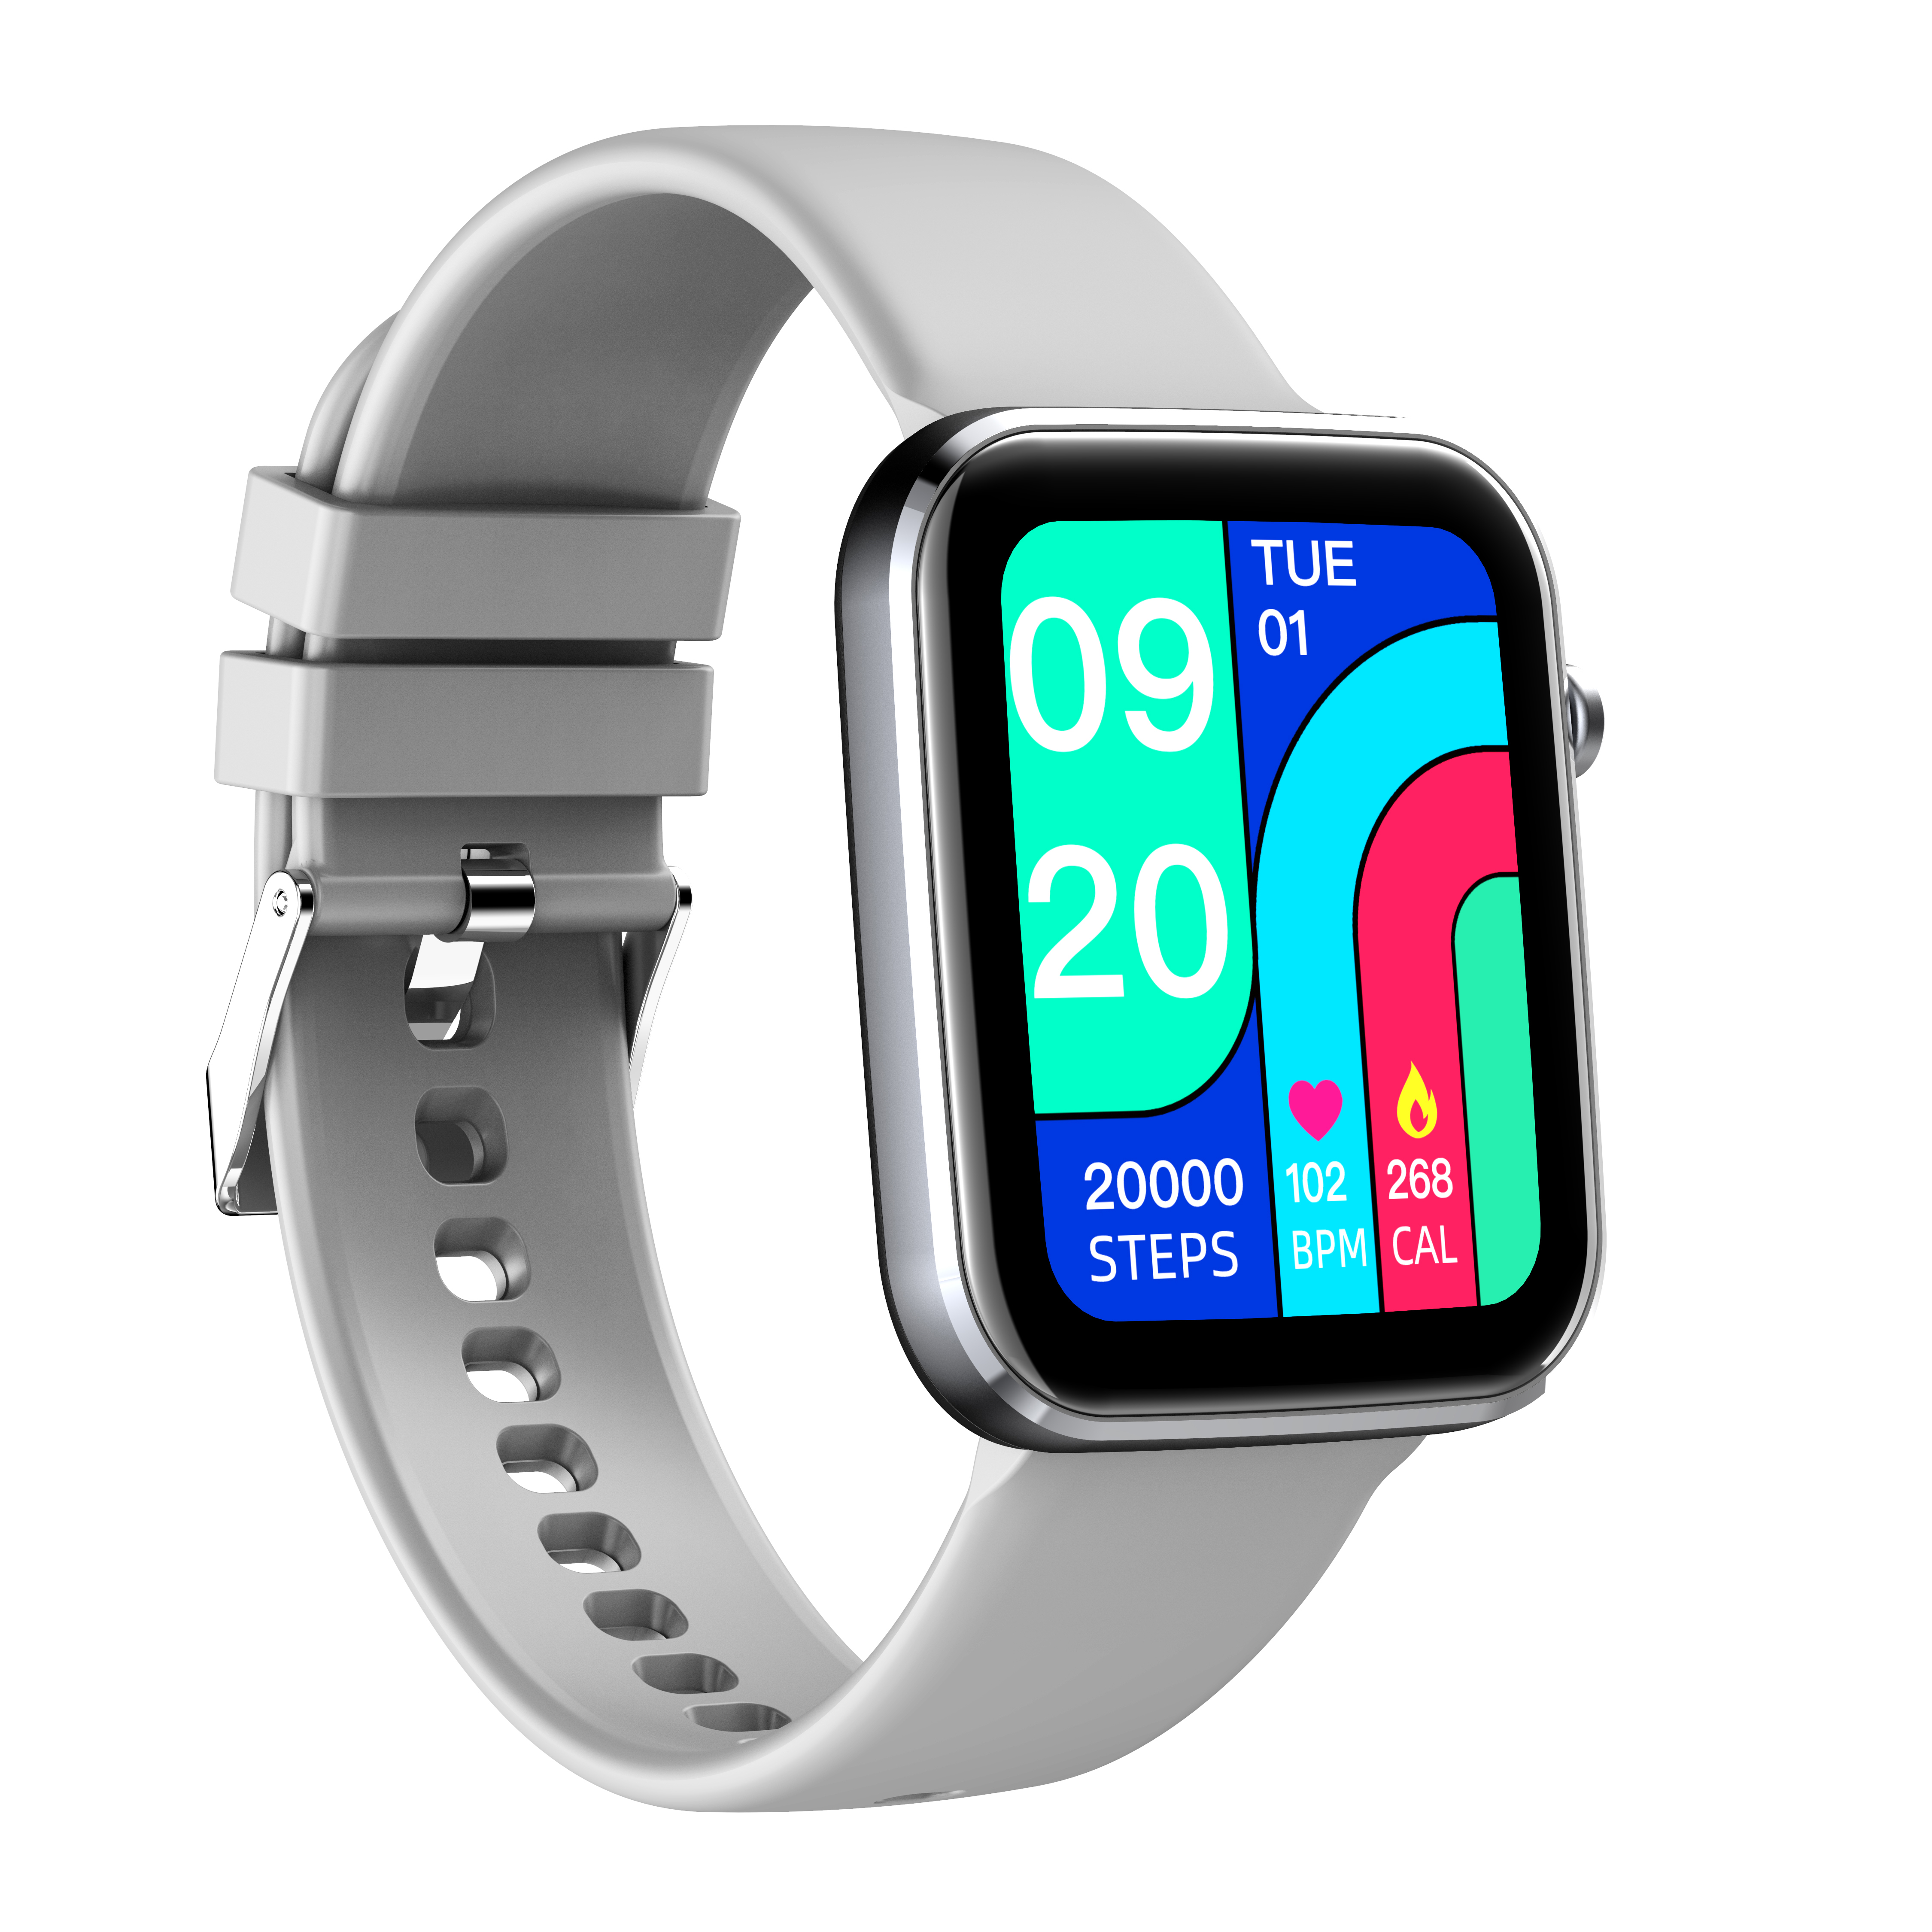 High Quality Personal Smart Sport Bracelet with Heart Rate Spo2 